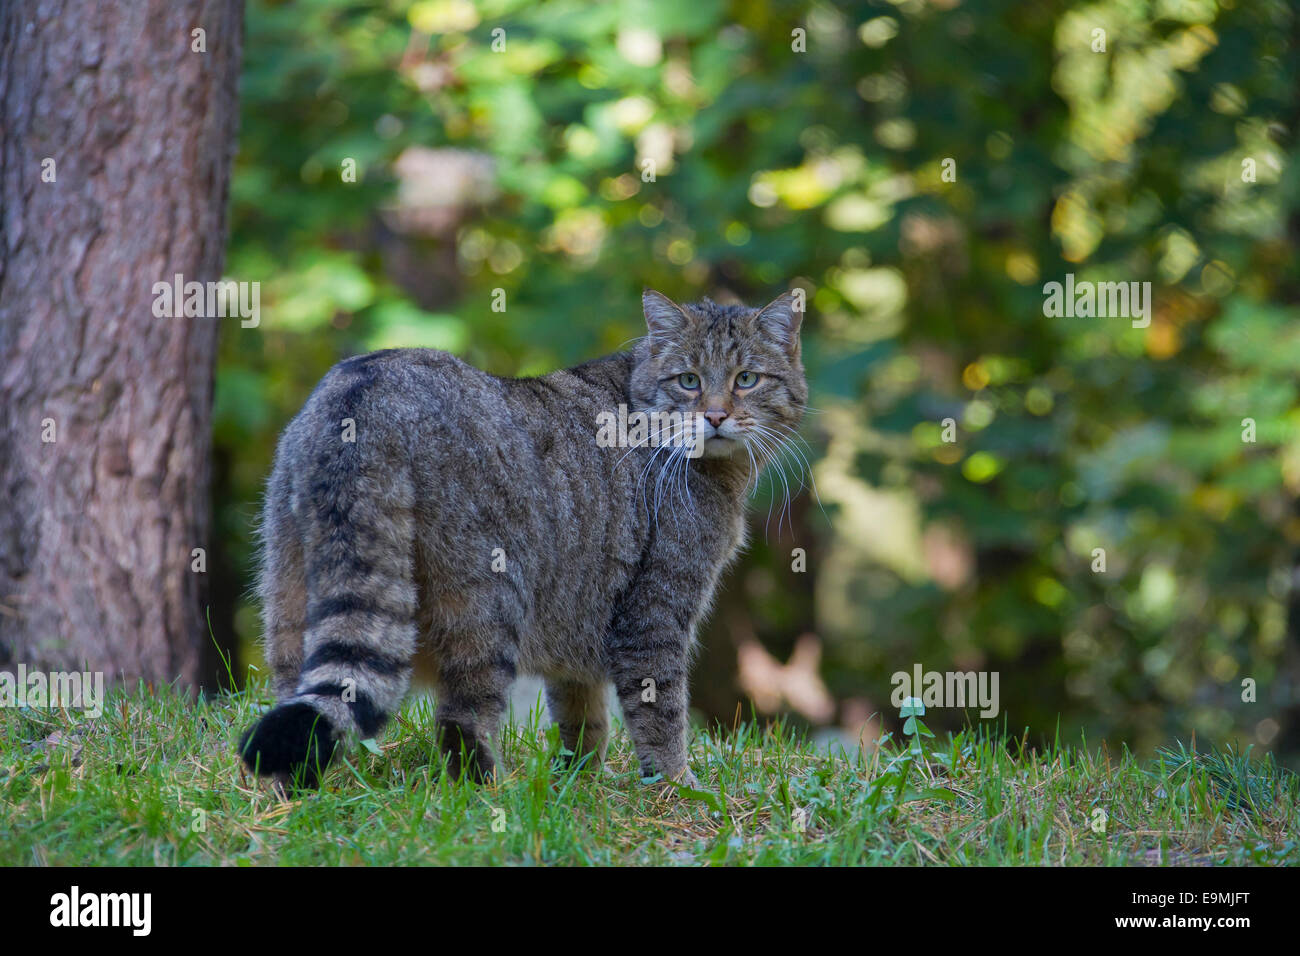 European Wild Cat (Felis silvestris). Adult standing in a forest Germany Stock Photo